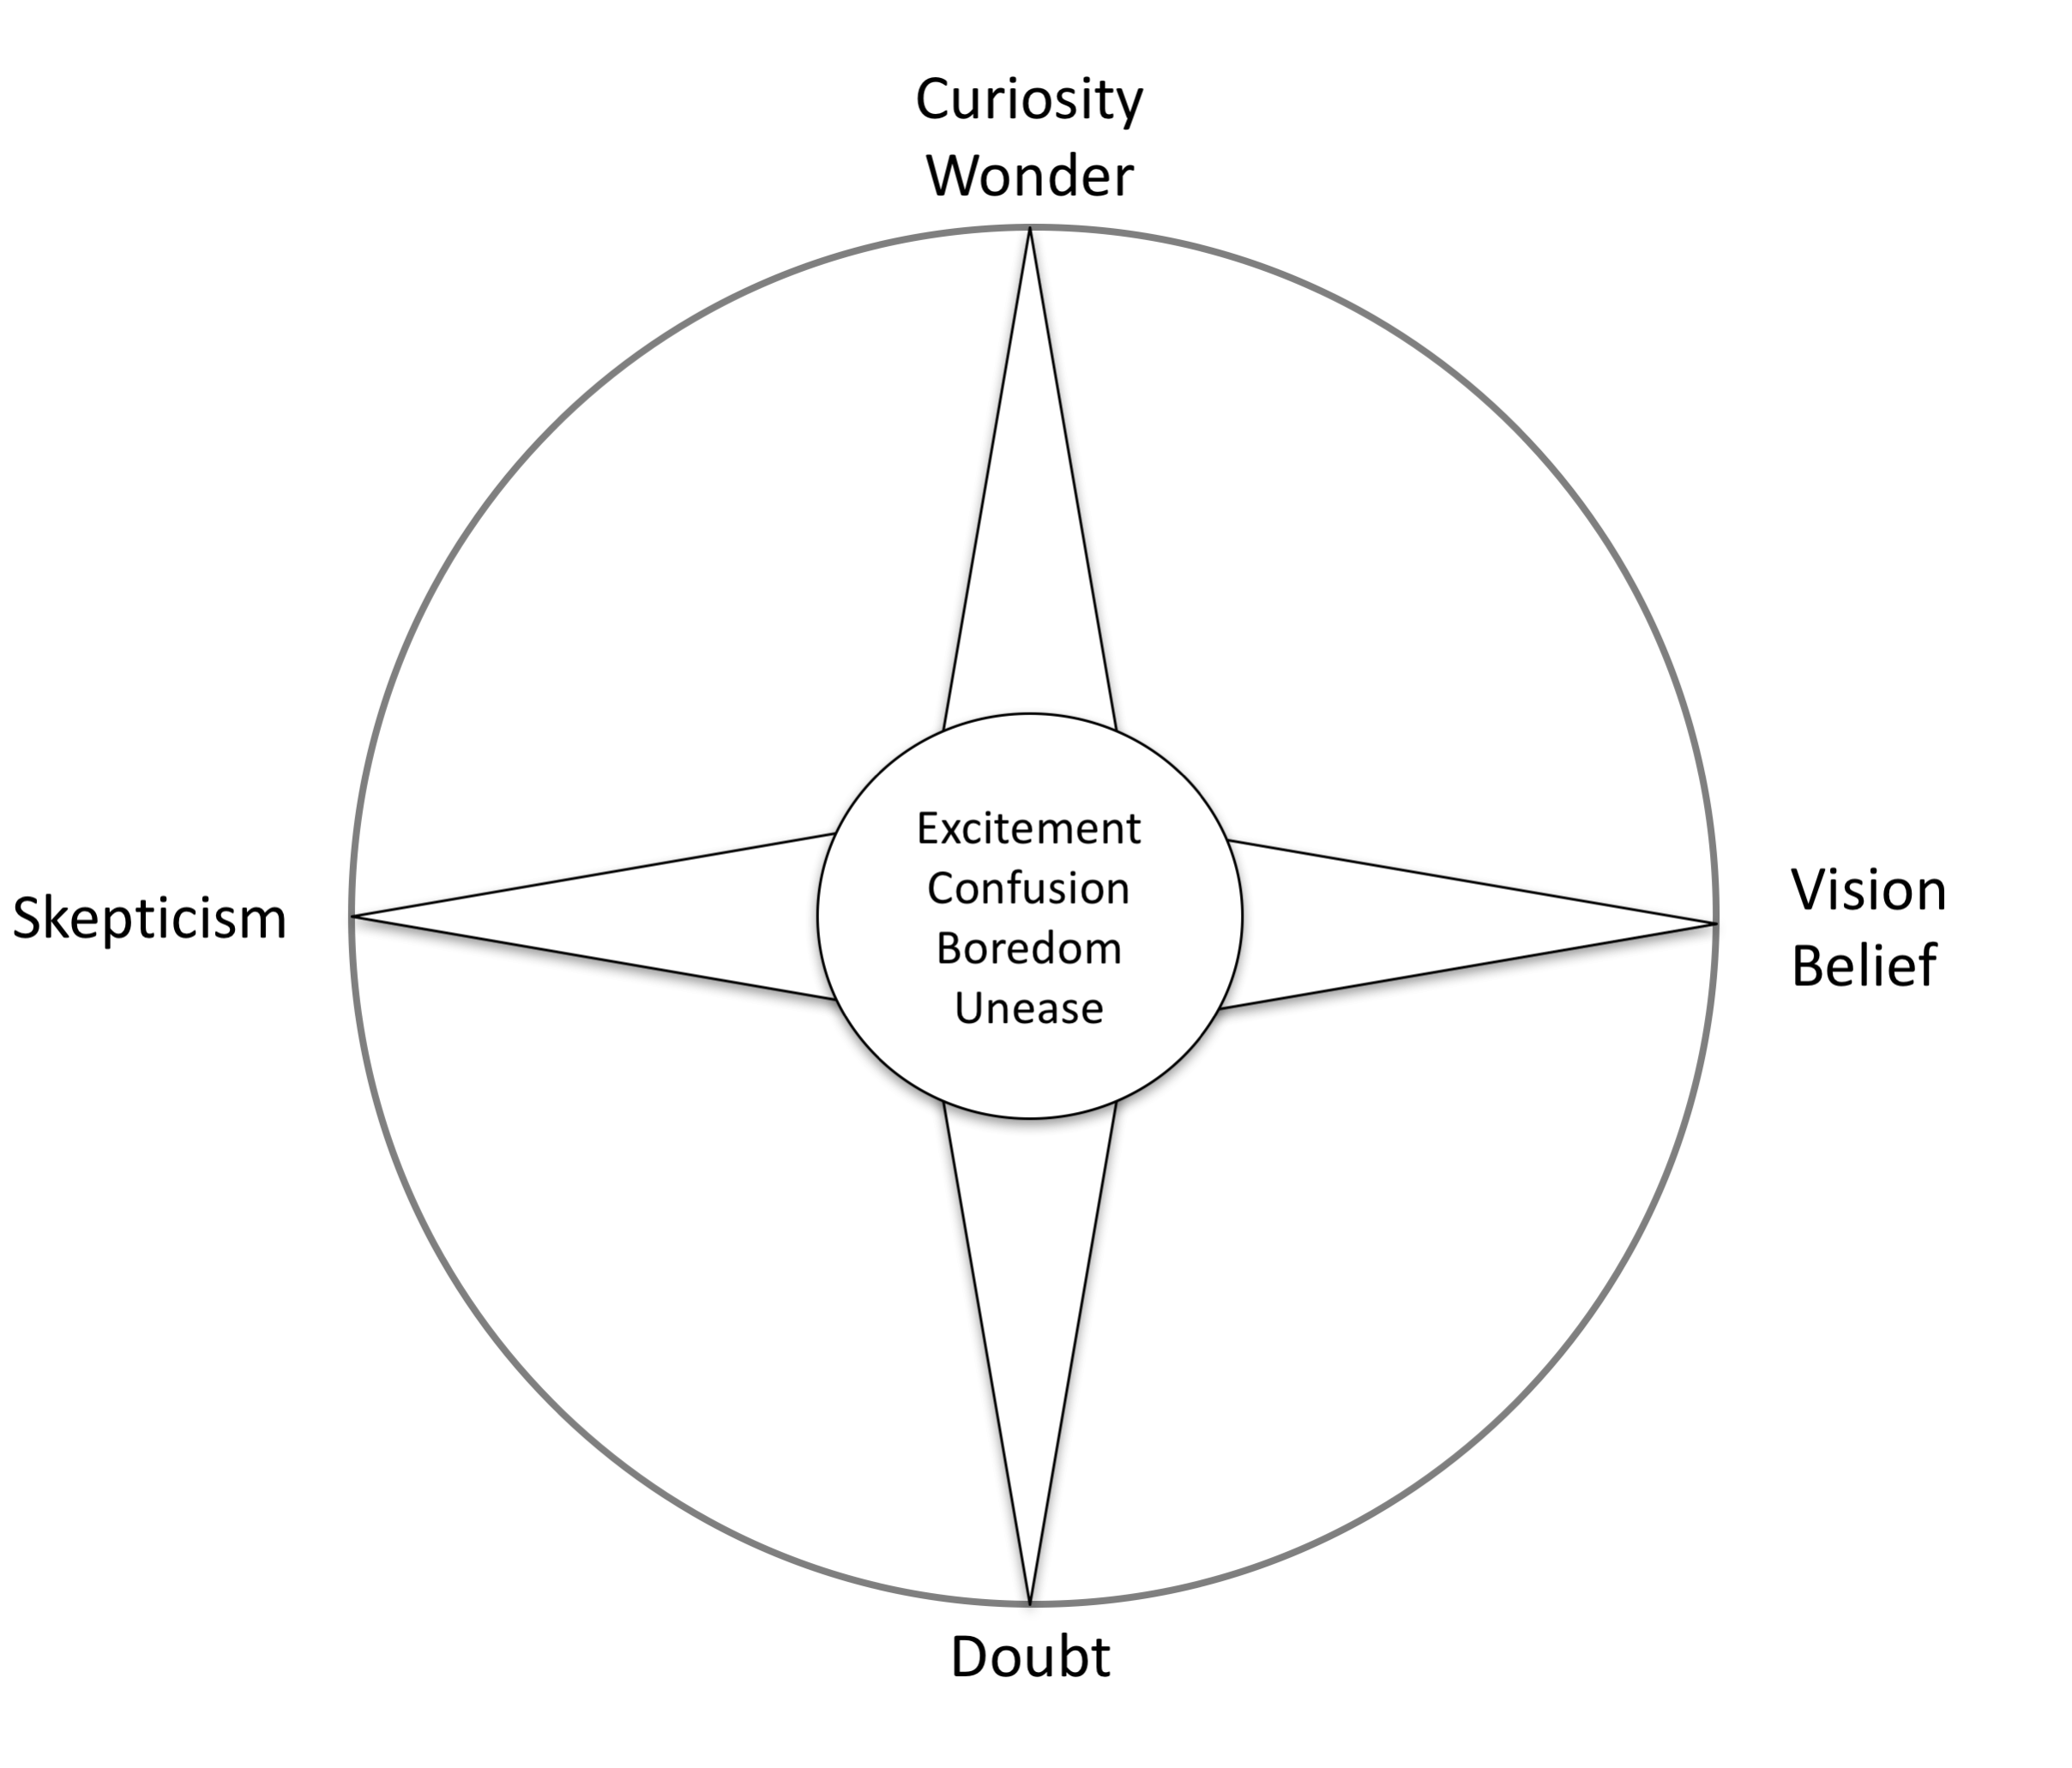 Figure 1. The four points on the research compass.